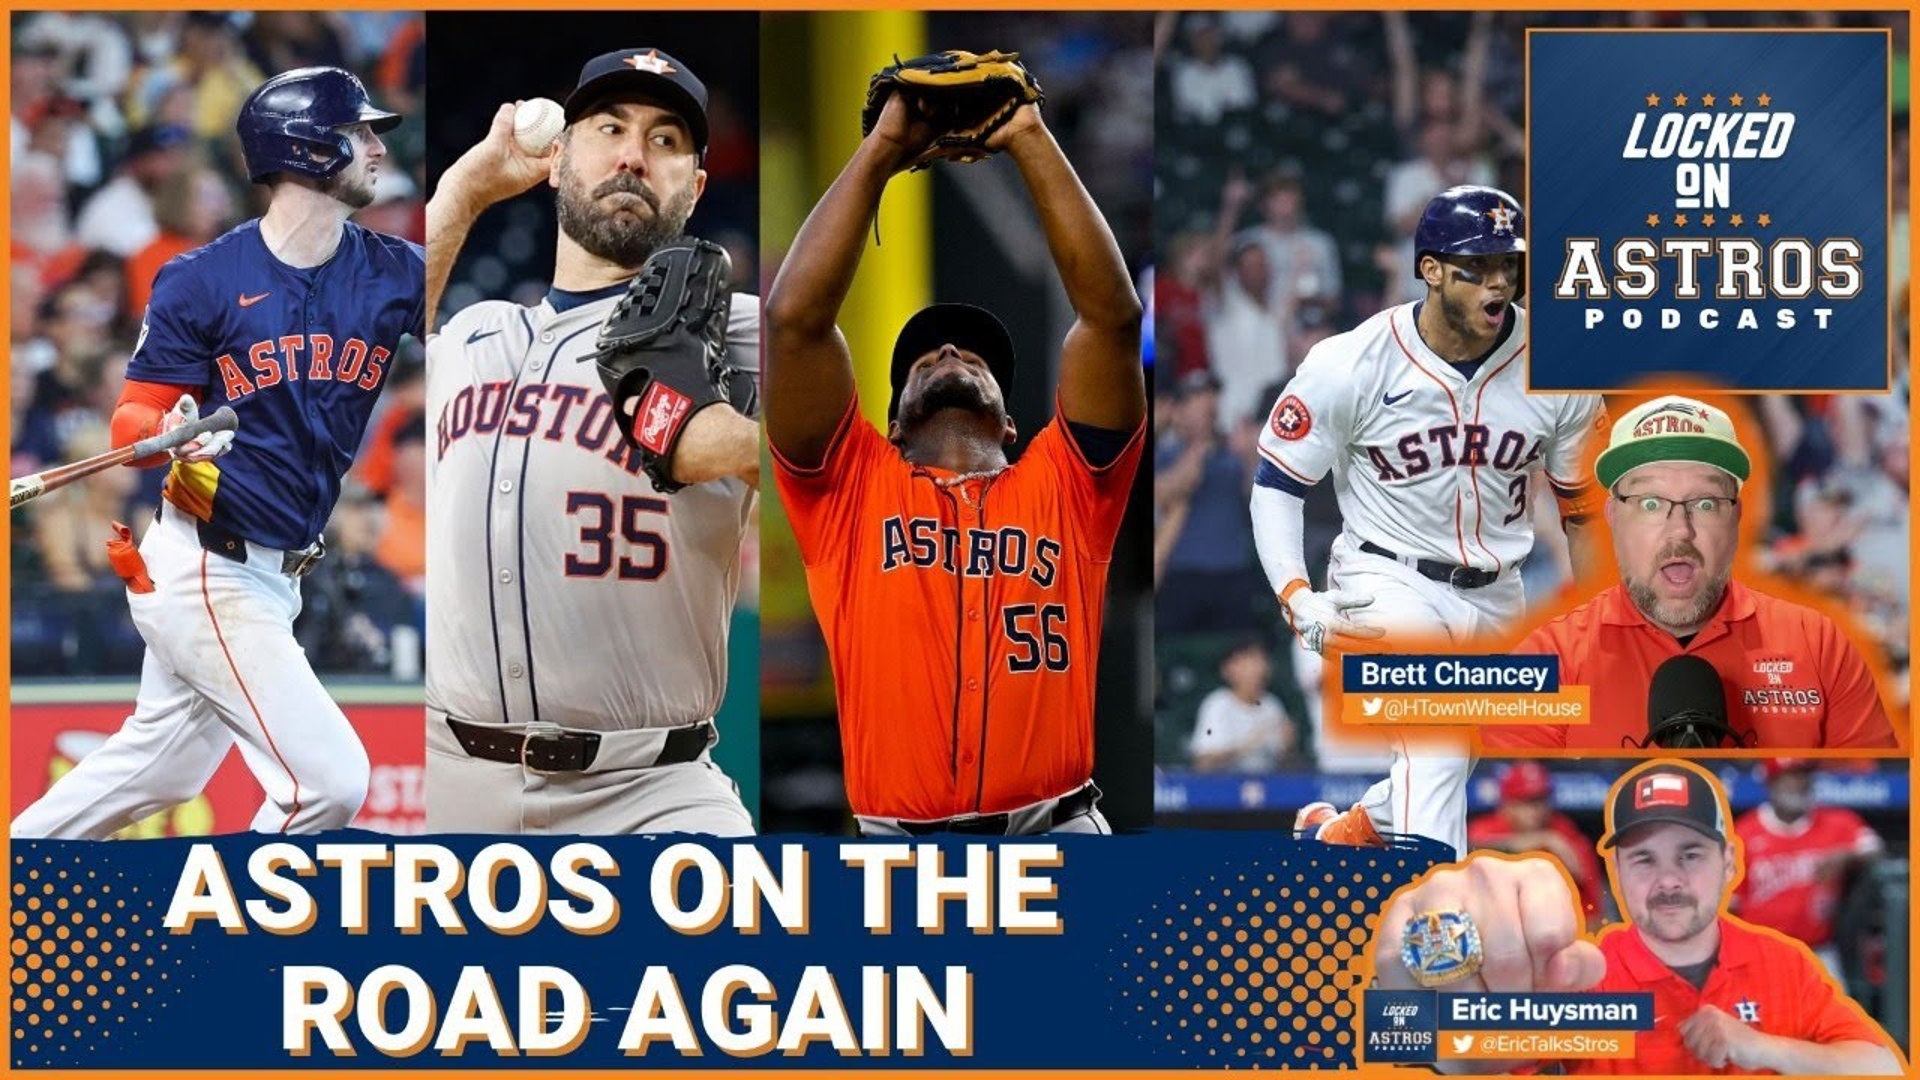 Astros: Quest for the A.L. West